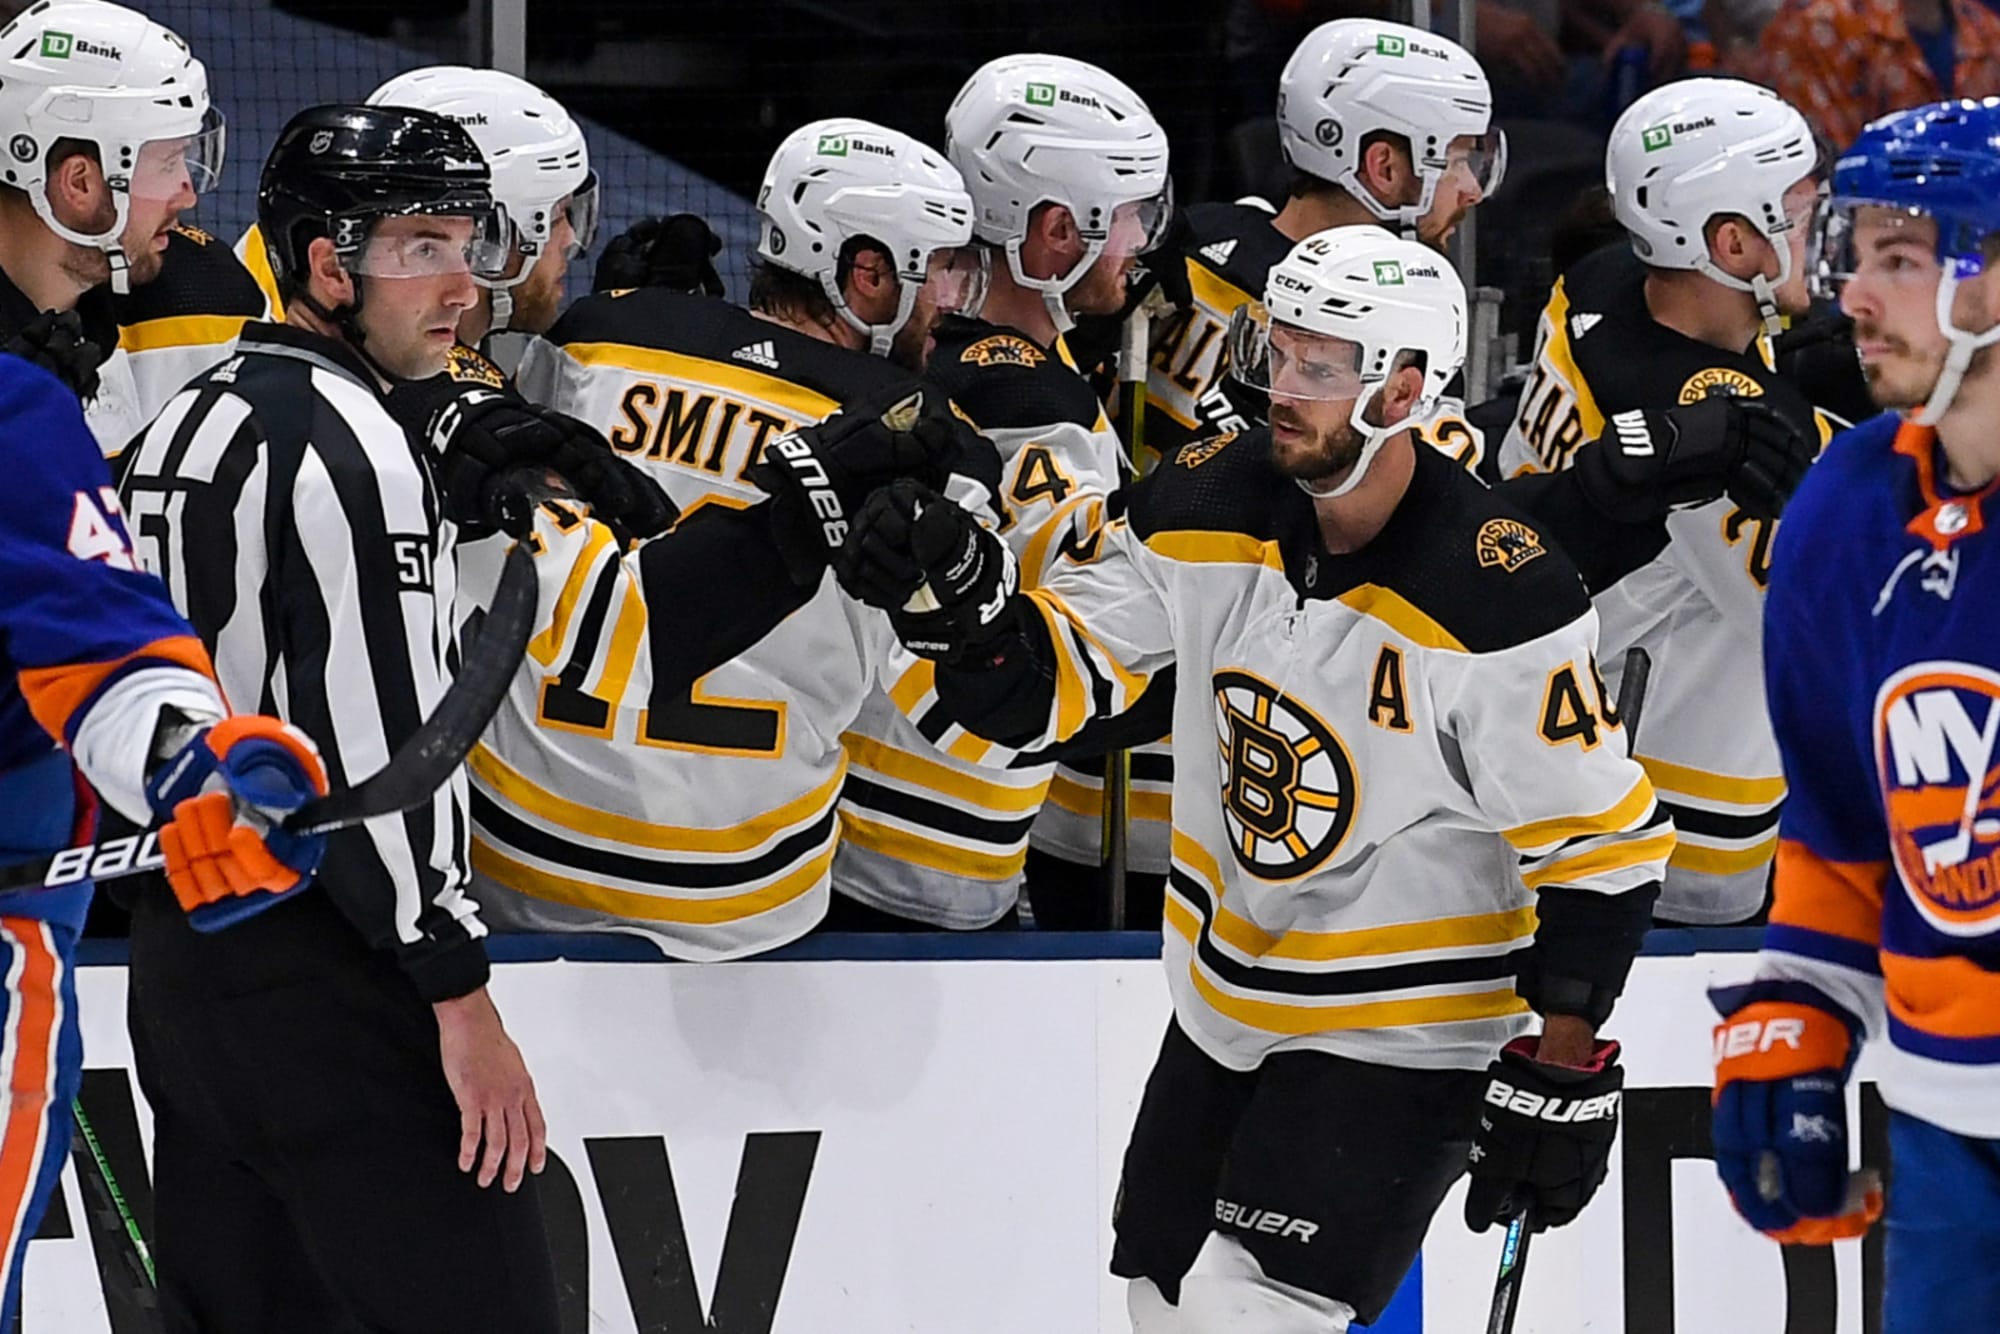 Boston Bruins Why Game 5 is Almost a MustWin in Boston